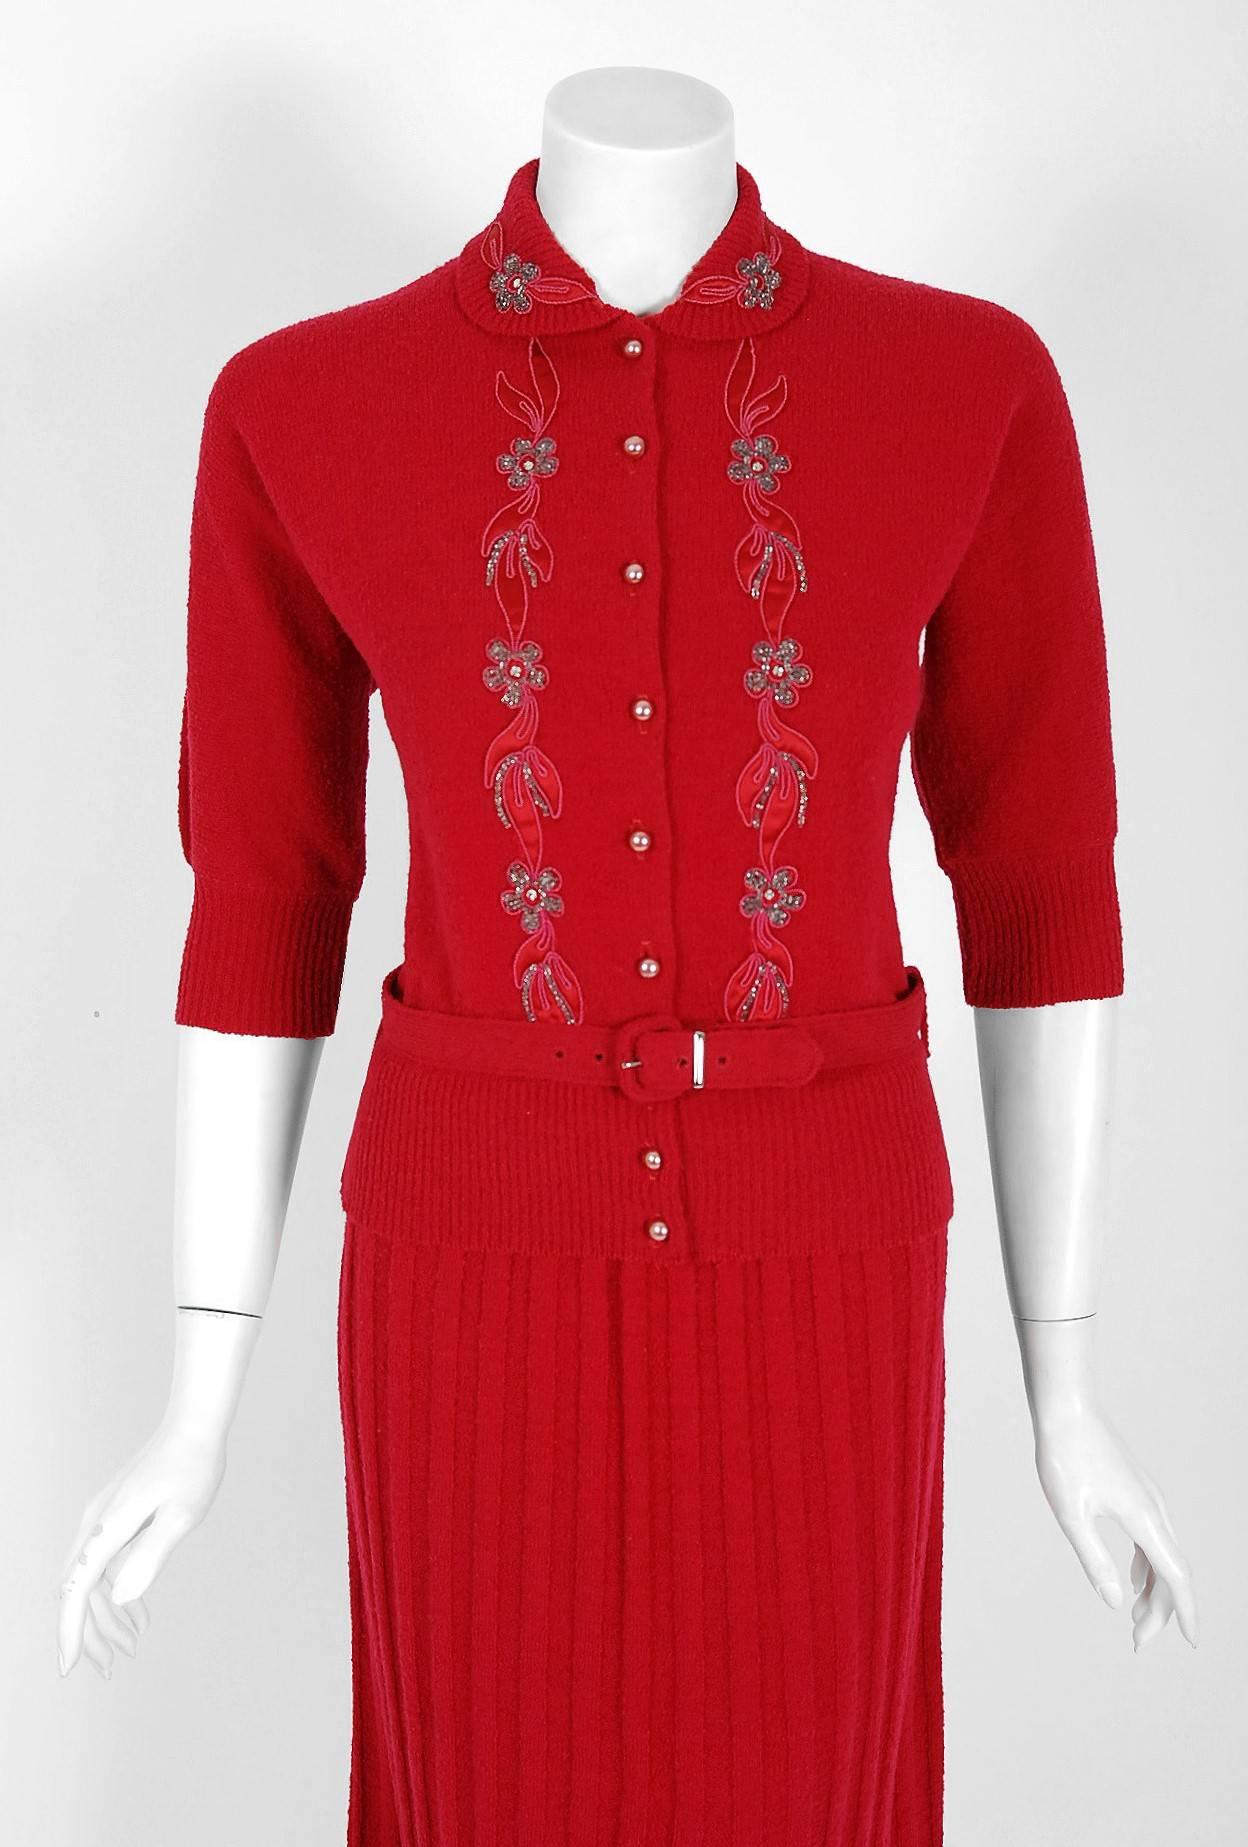 An alluring Koldin Originals cranberry-red chenille knit wool ensemble from the "Old Hollywood" era of glamour. The sweater has beautiful pearlized buttons, novelty leaf satin-appliques and beaded floral detail  I love the hourglass belted